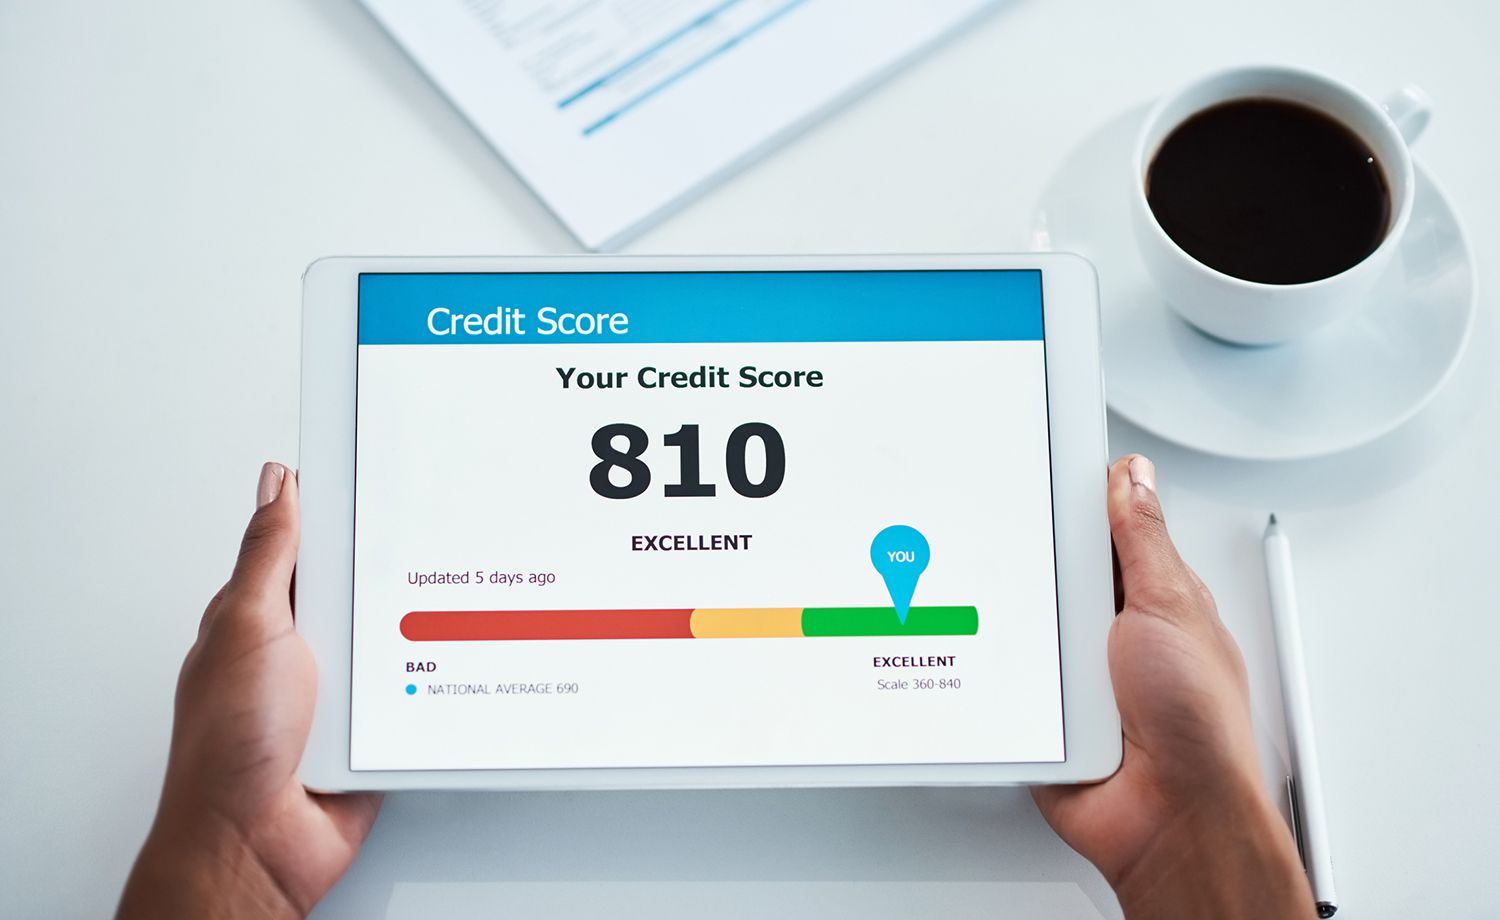 How To Do Your Credit Score Today?